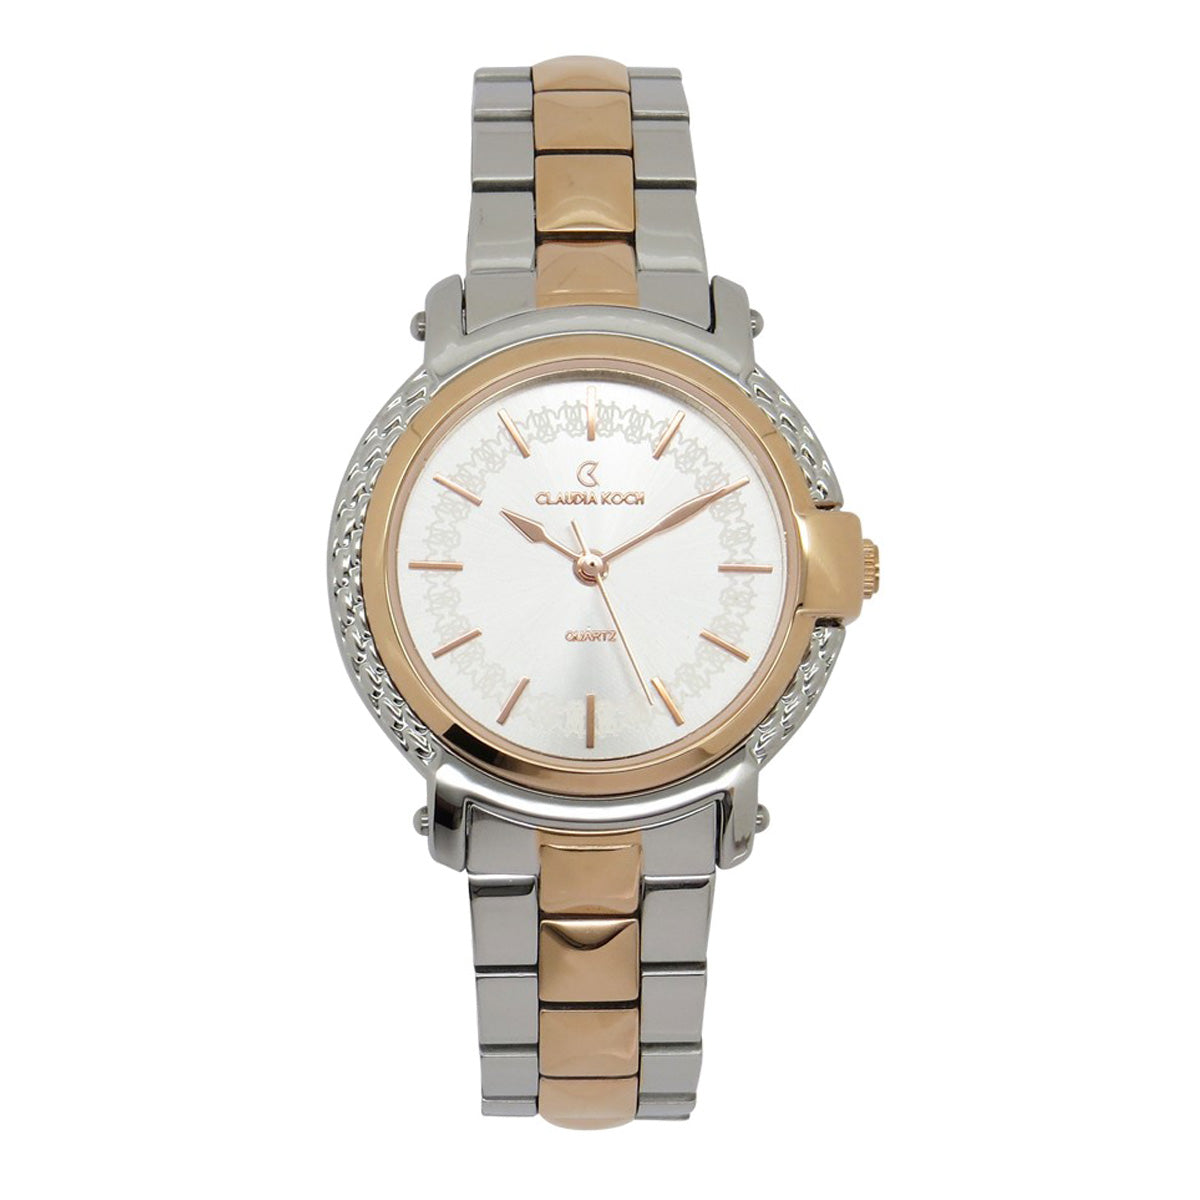 Stainless Steel Analog special face classy Women watch